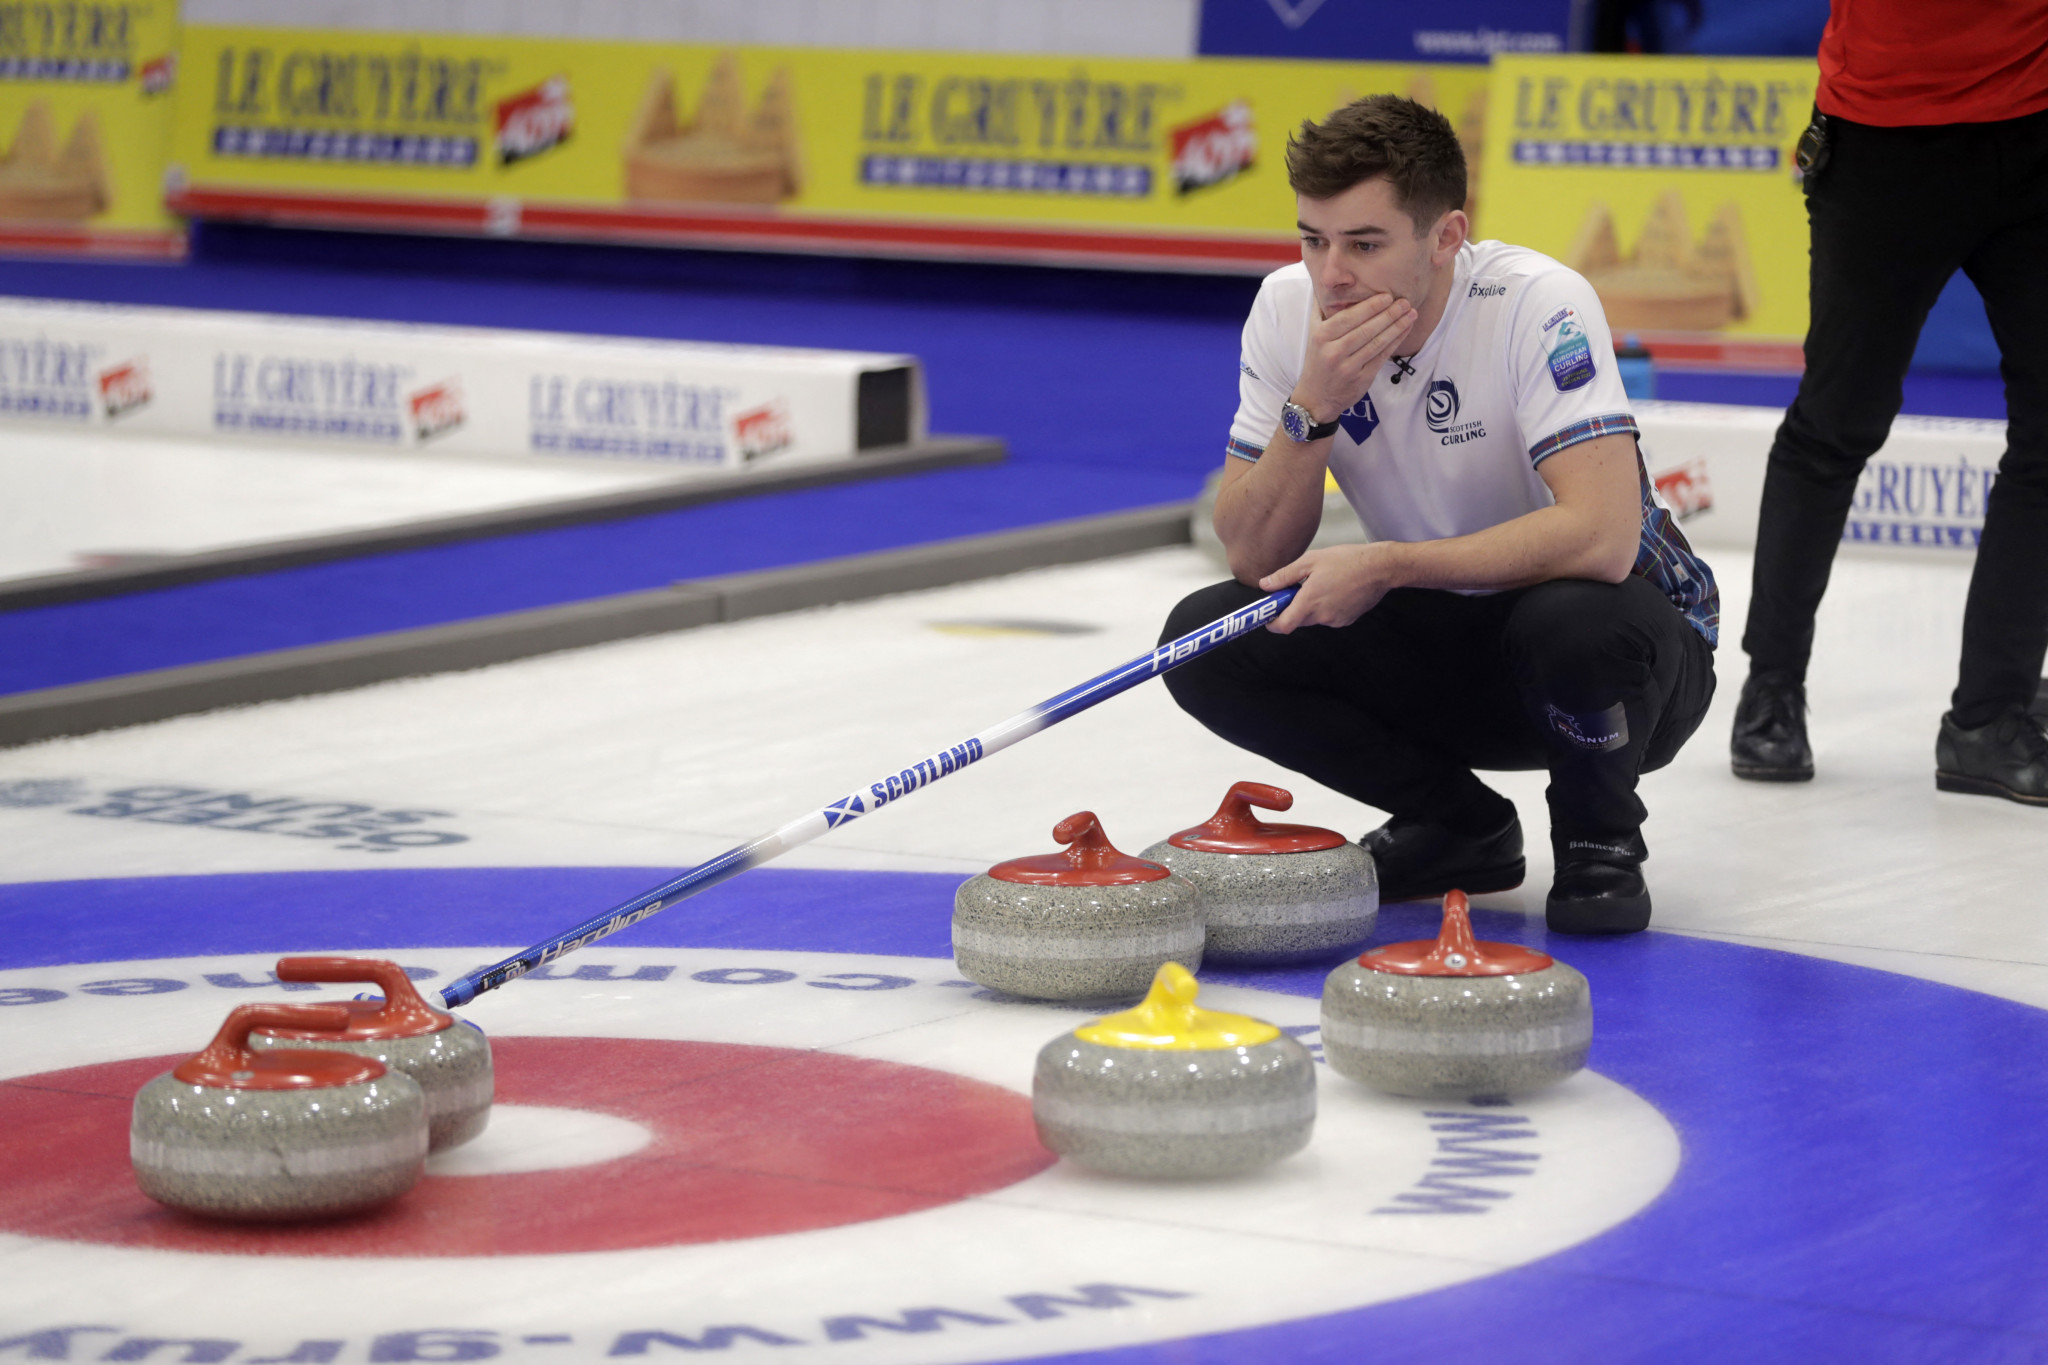 Le Gruyère AOP is an official partner of World Curling and sponsored the European Curling Championships in Sweden, which concluded at the weekend ©Getty Images